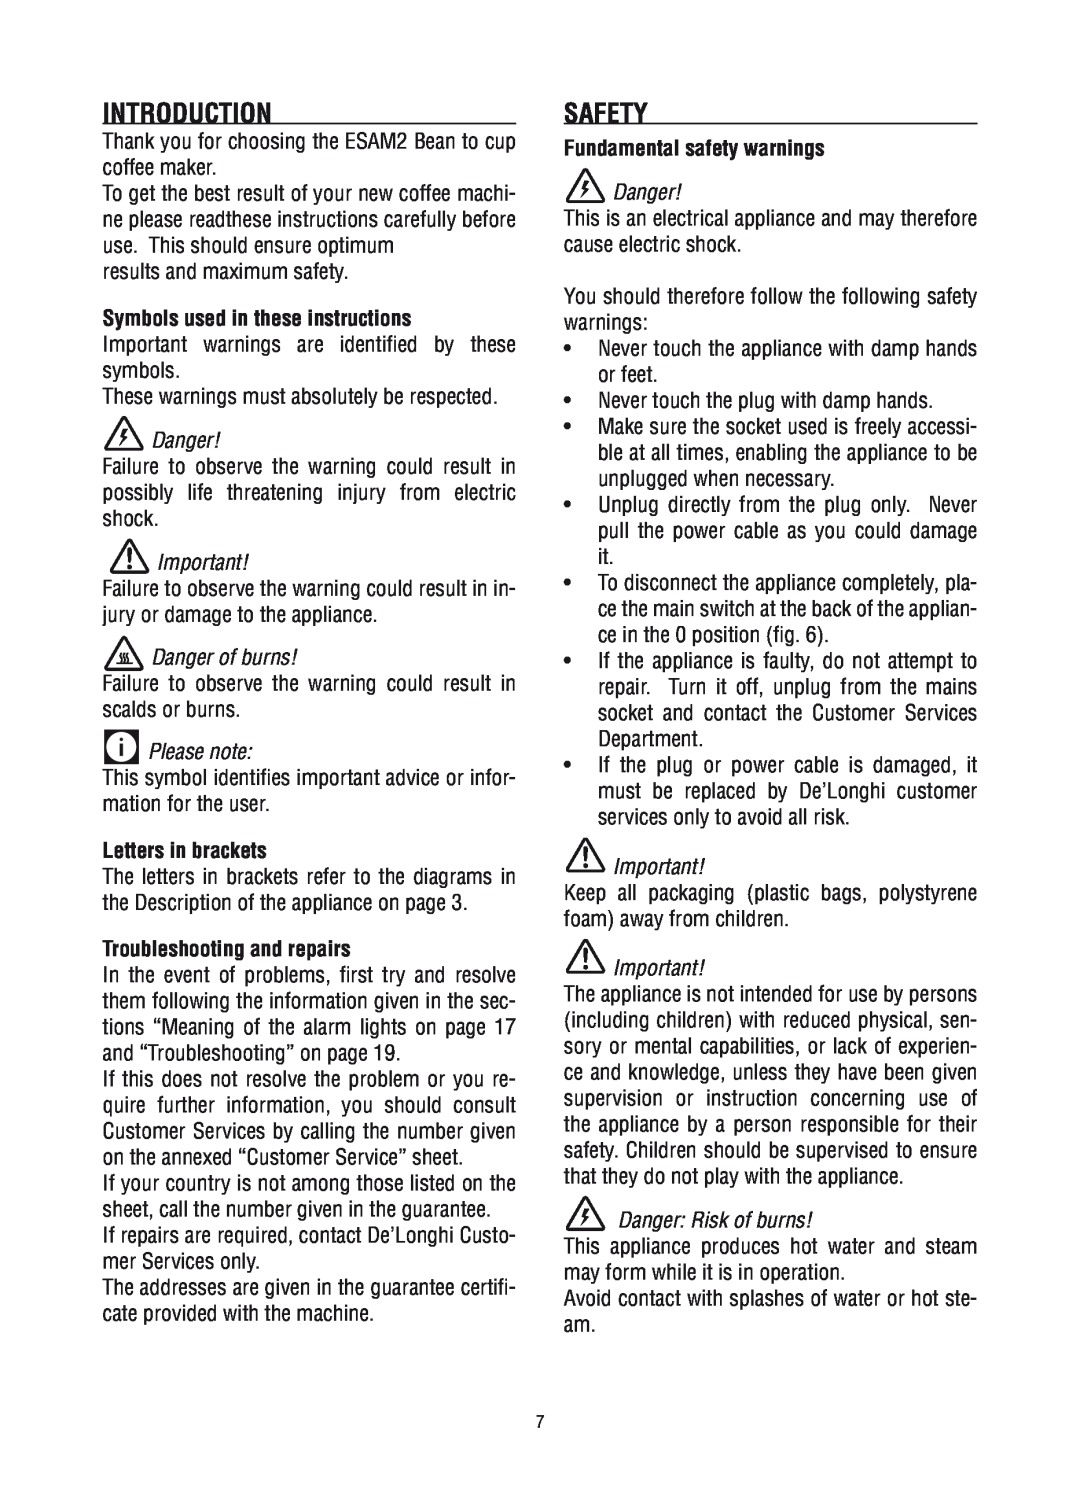 DeLonghi ESAM2800, ESAM 2200, ESAM2600 manual Introduction, Safety, Symbols used in these instructions, Letters in brackets 